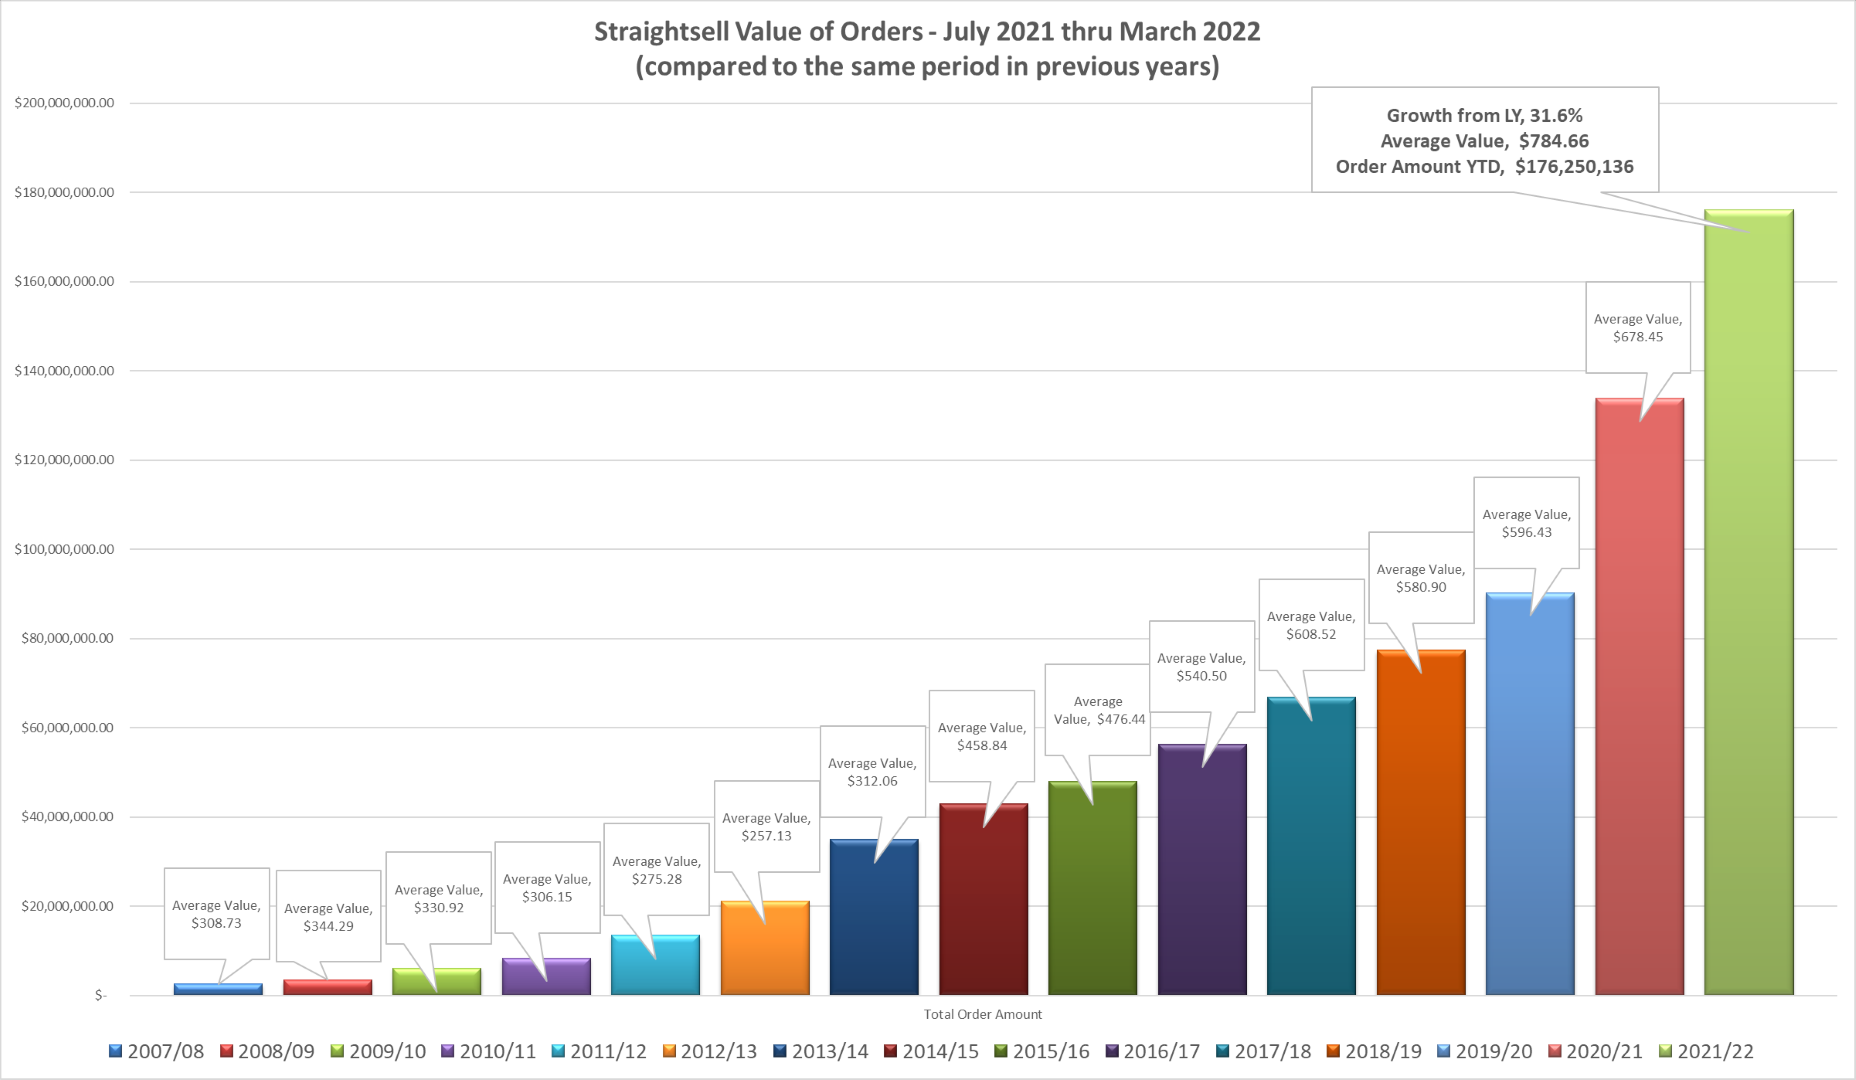 Straightsell order numbers and value of orders for July 2021 thru March 2022 are...